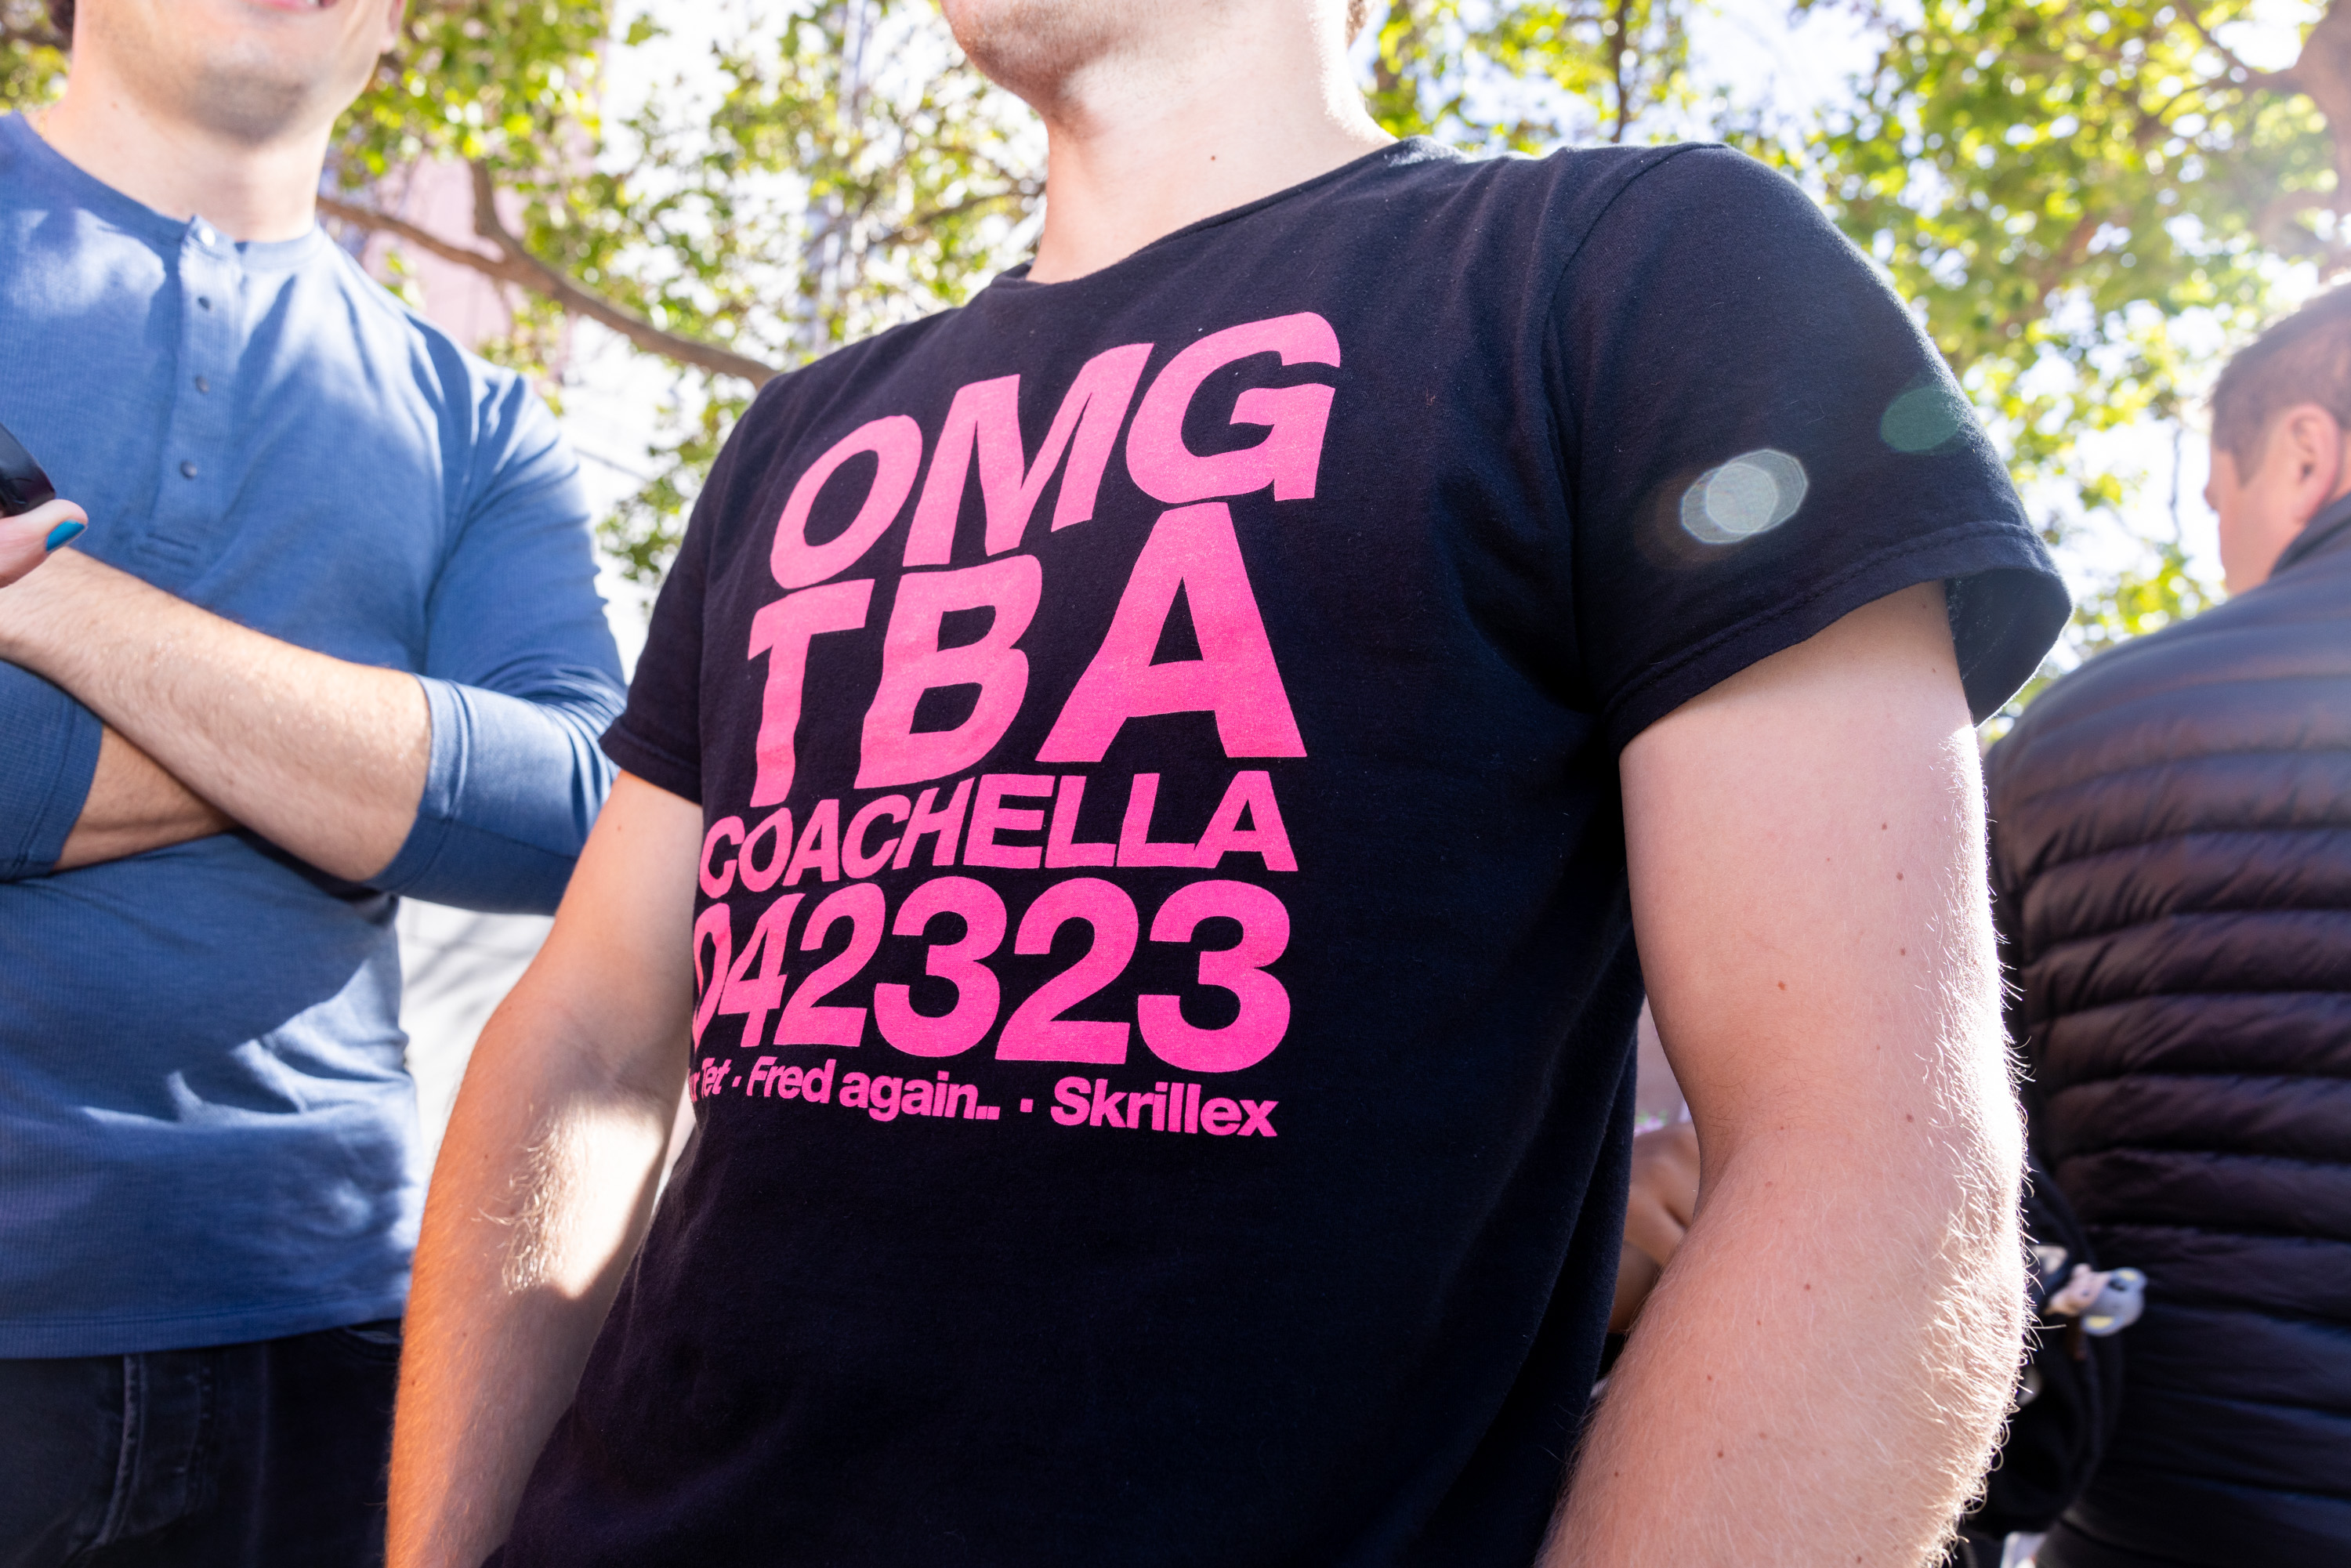 A person wears a black T-shirt with large, bright pink text promoting Coachella. The text reads, &quot;OMG TBA COACHELLA 042323,&quot; featuring &quot;Fred again..&quot; and &quot;Skrillex.&quot;